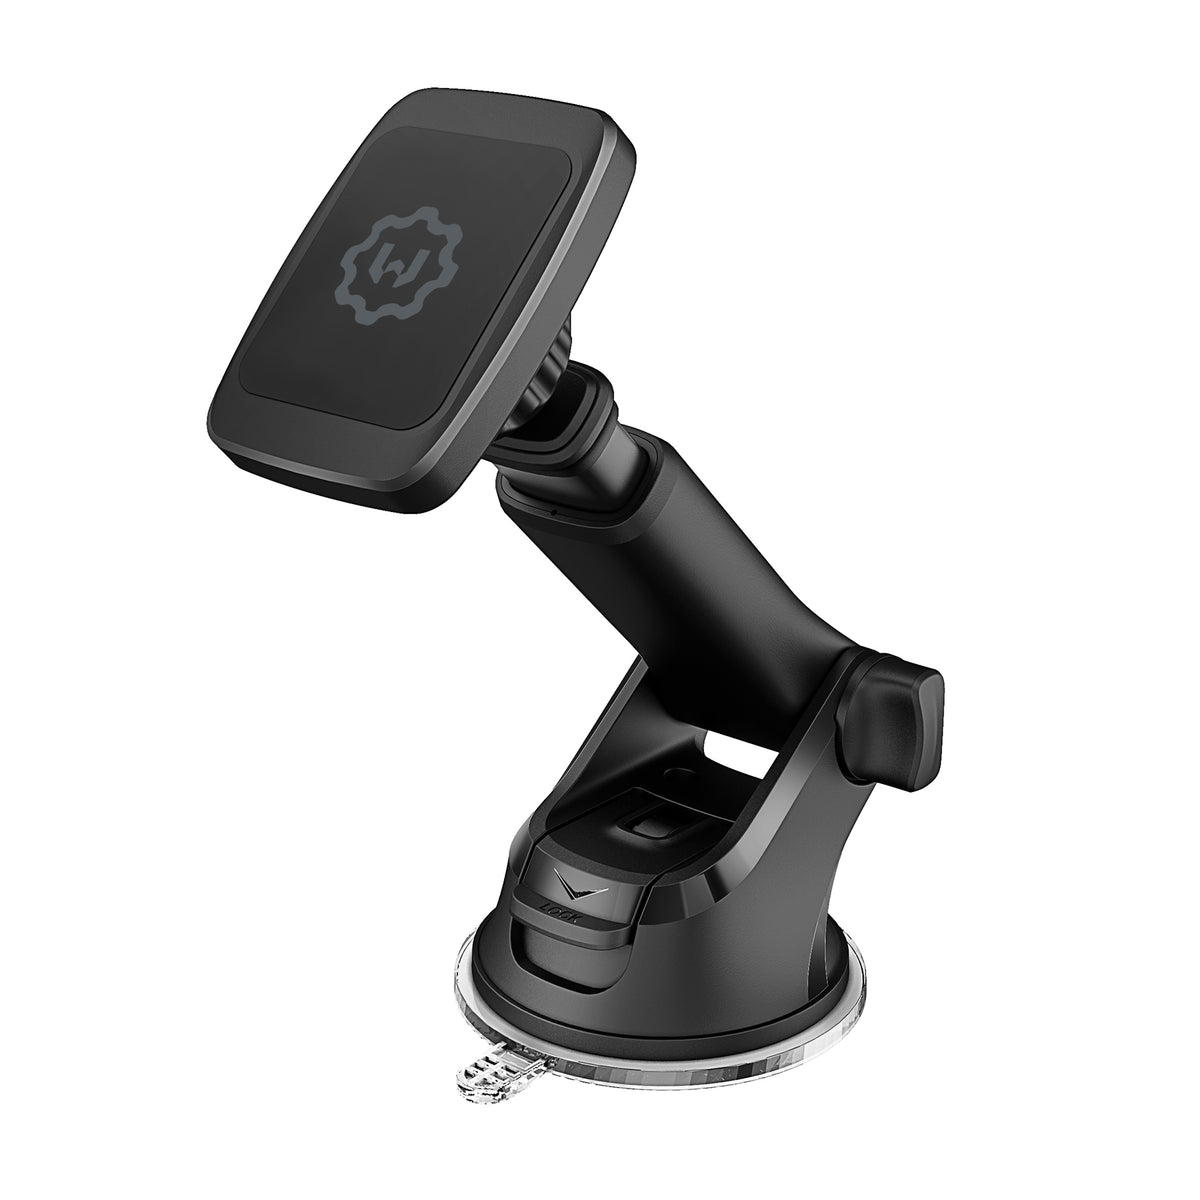 ITrims Car Accessories for Mercedes-Benz A-Class (W177) 2019 2020 Car  Dashboard Mount Mount Cell Phone Holder Car Adjustable Smart Phone Holder  Cradle